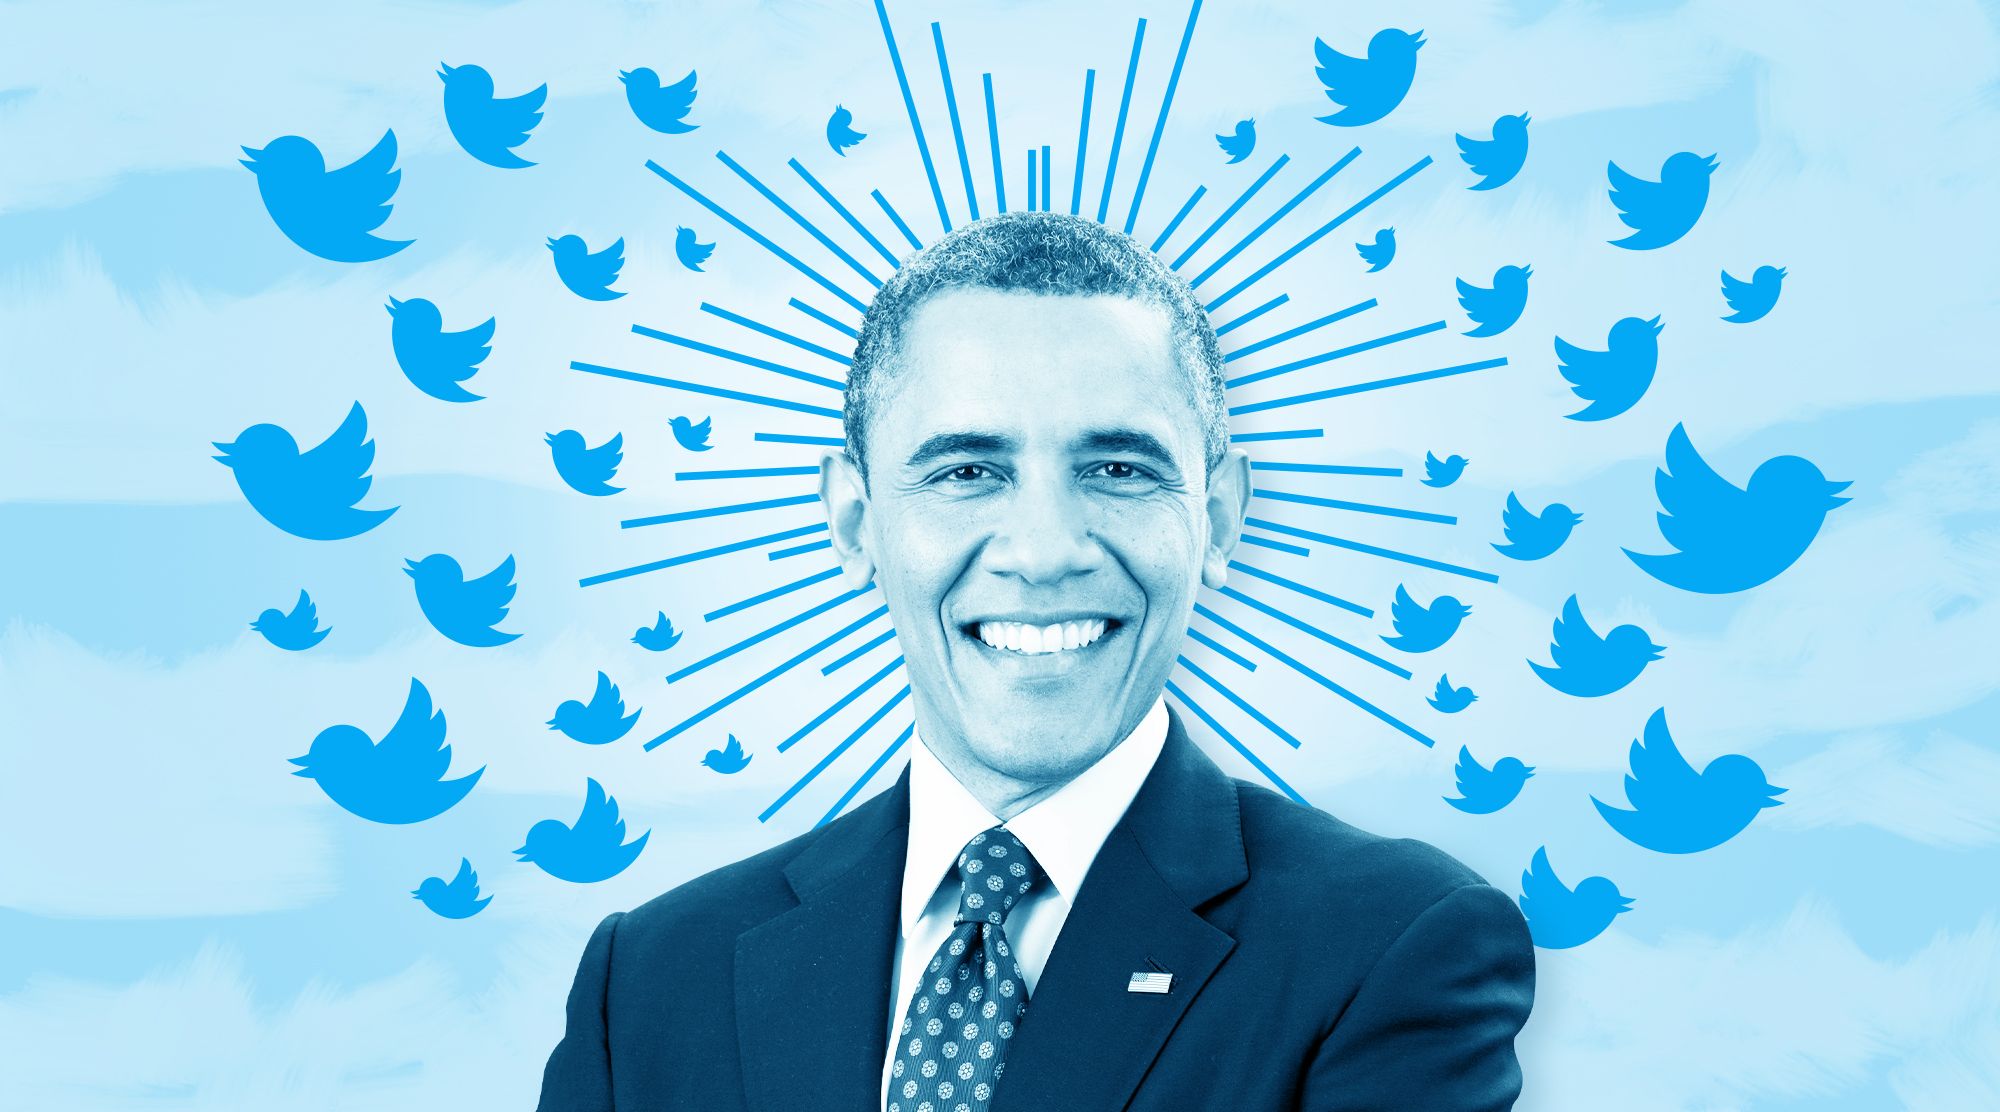 Double Check: Why an Obama Foundation Tweet Sparked George Floyd Conspiracy Claims